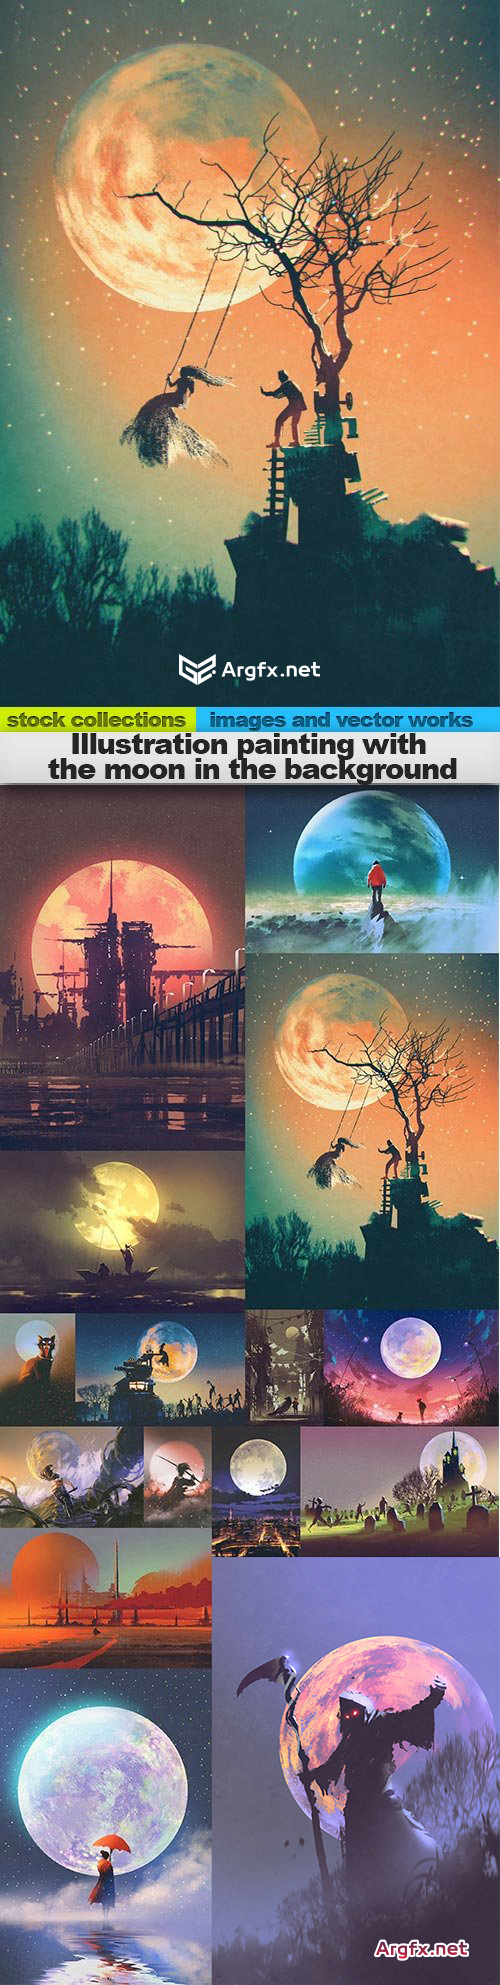 Illustration painting with the moon in the background, 15 x UHQ JPEG